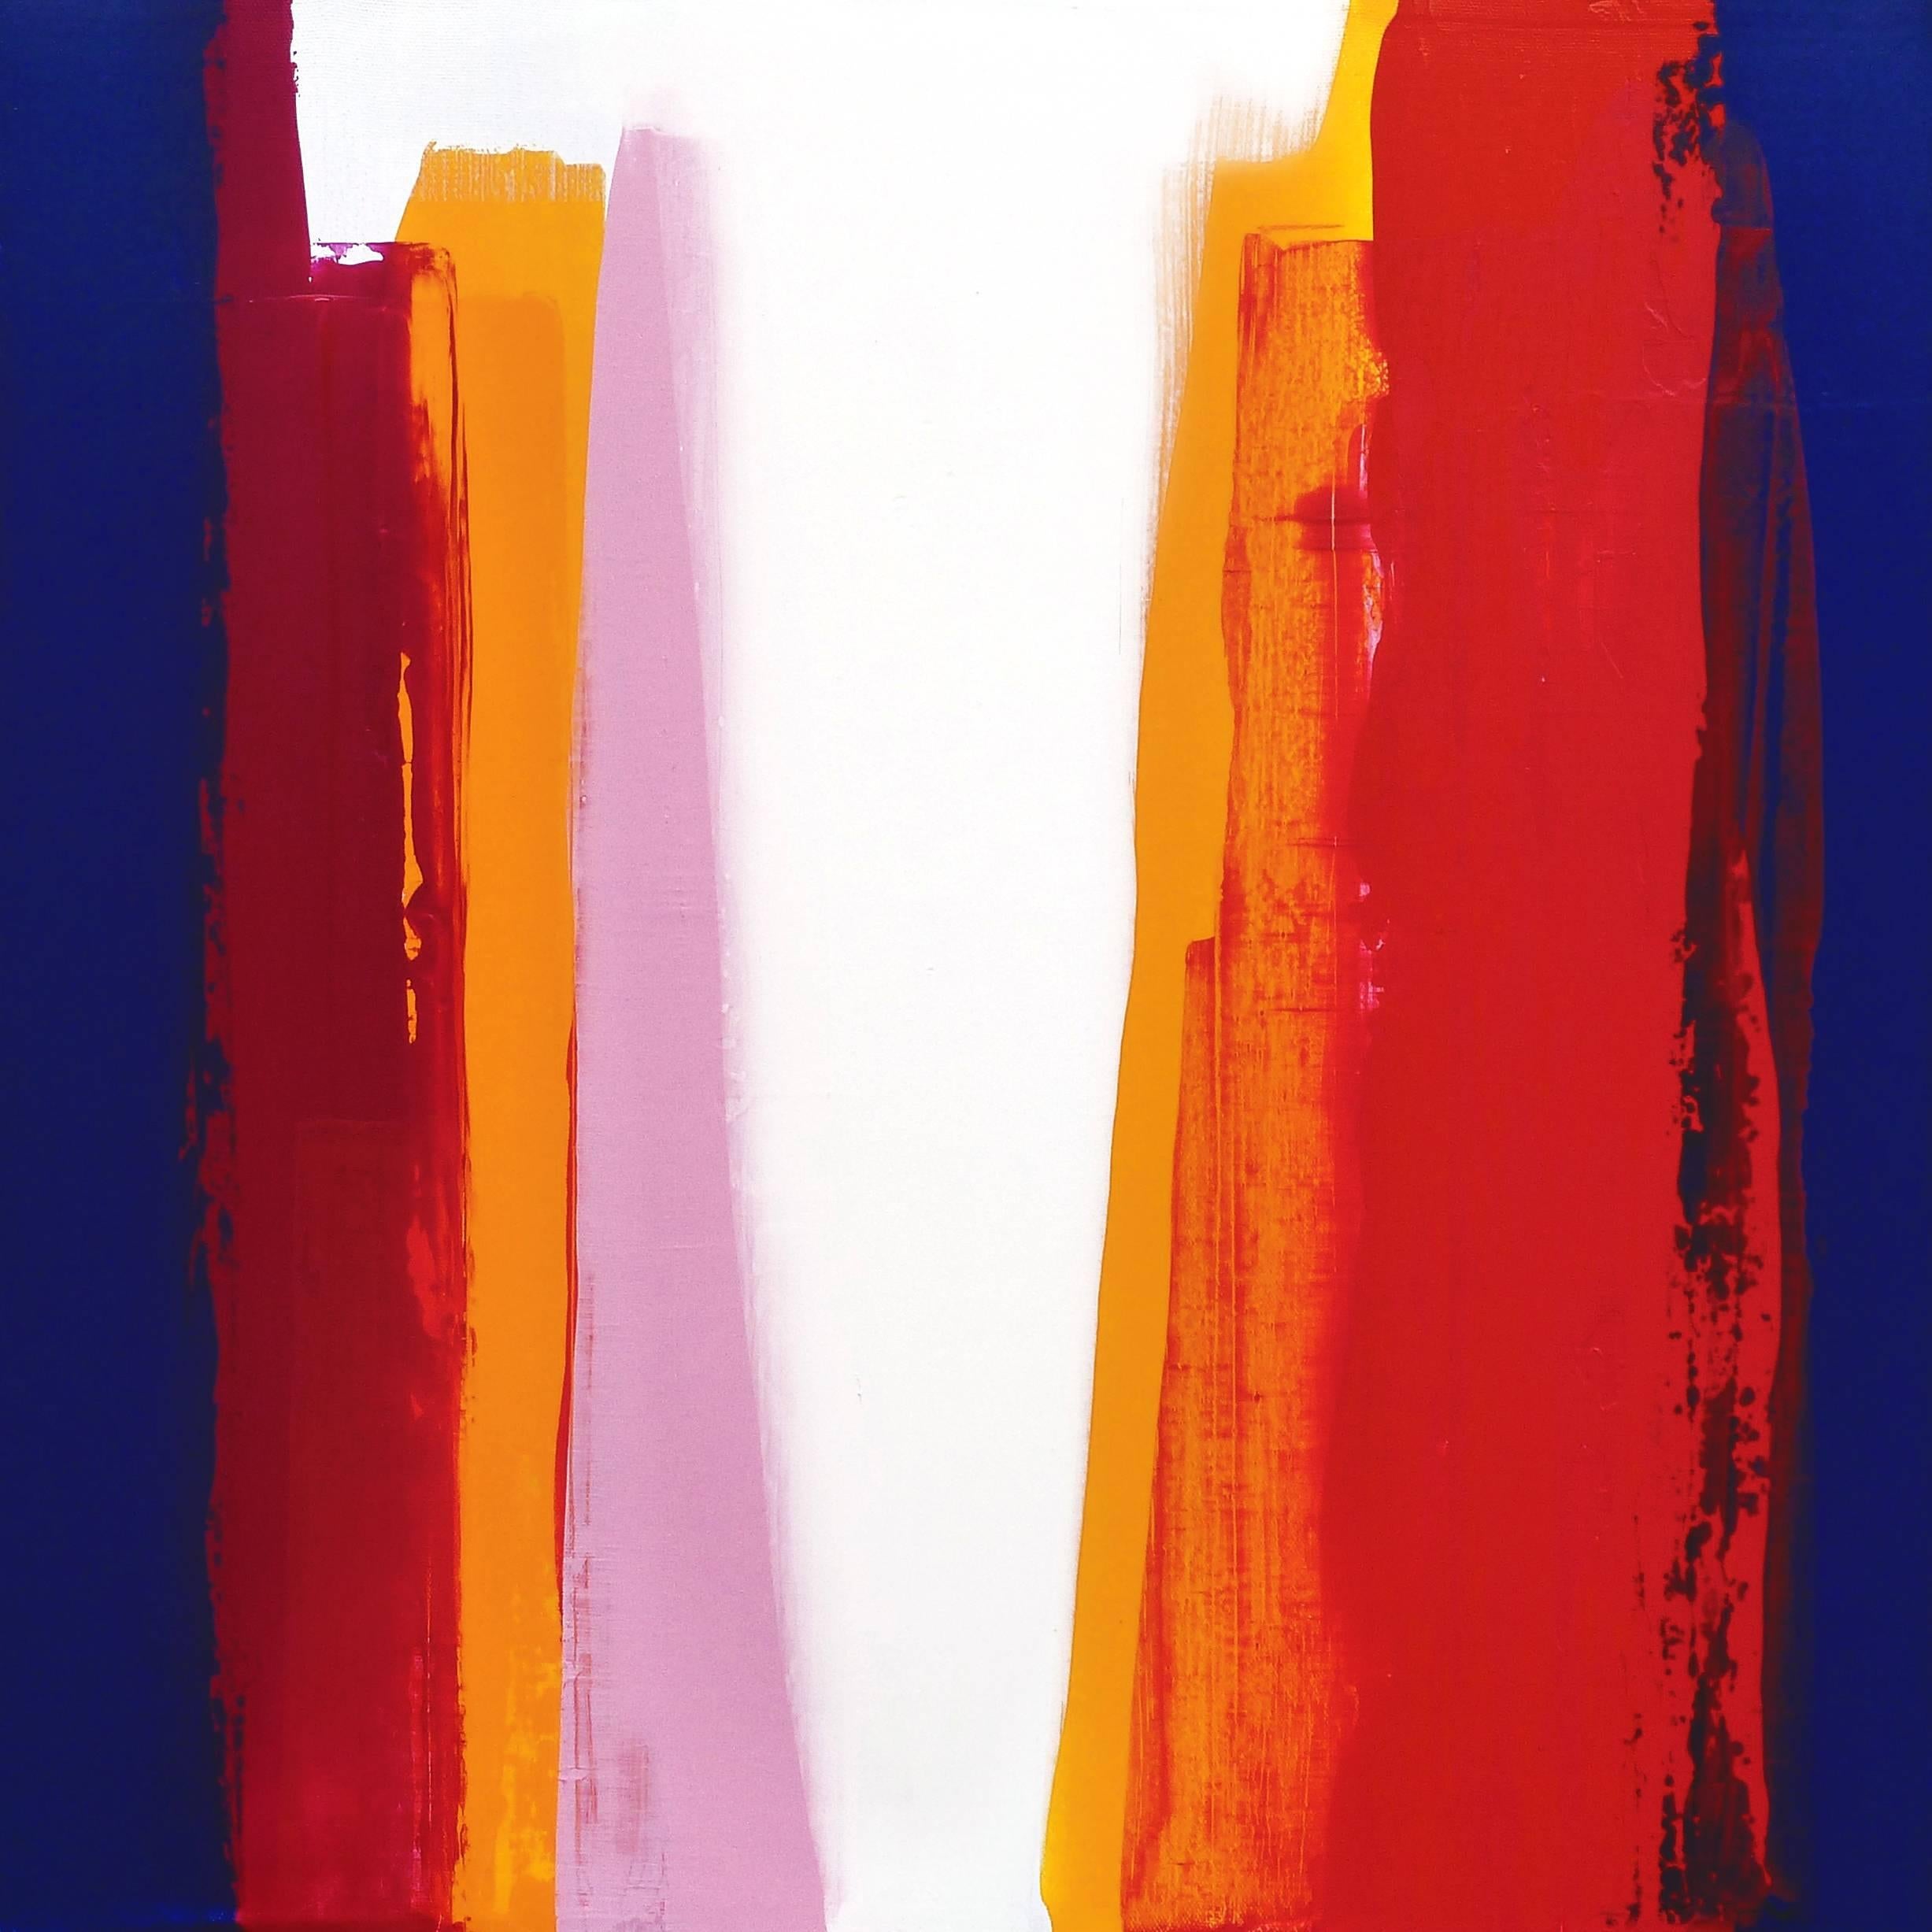 Dulm Abstract Painting - New York City buildings, bright color 